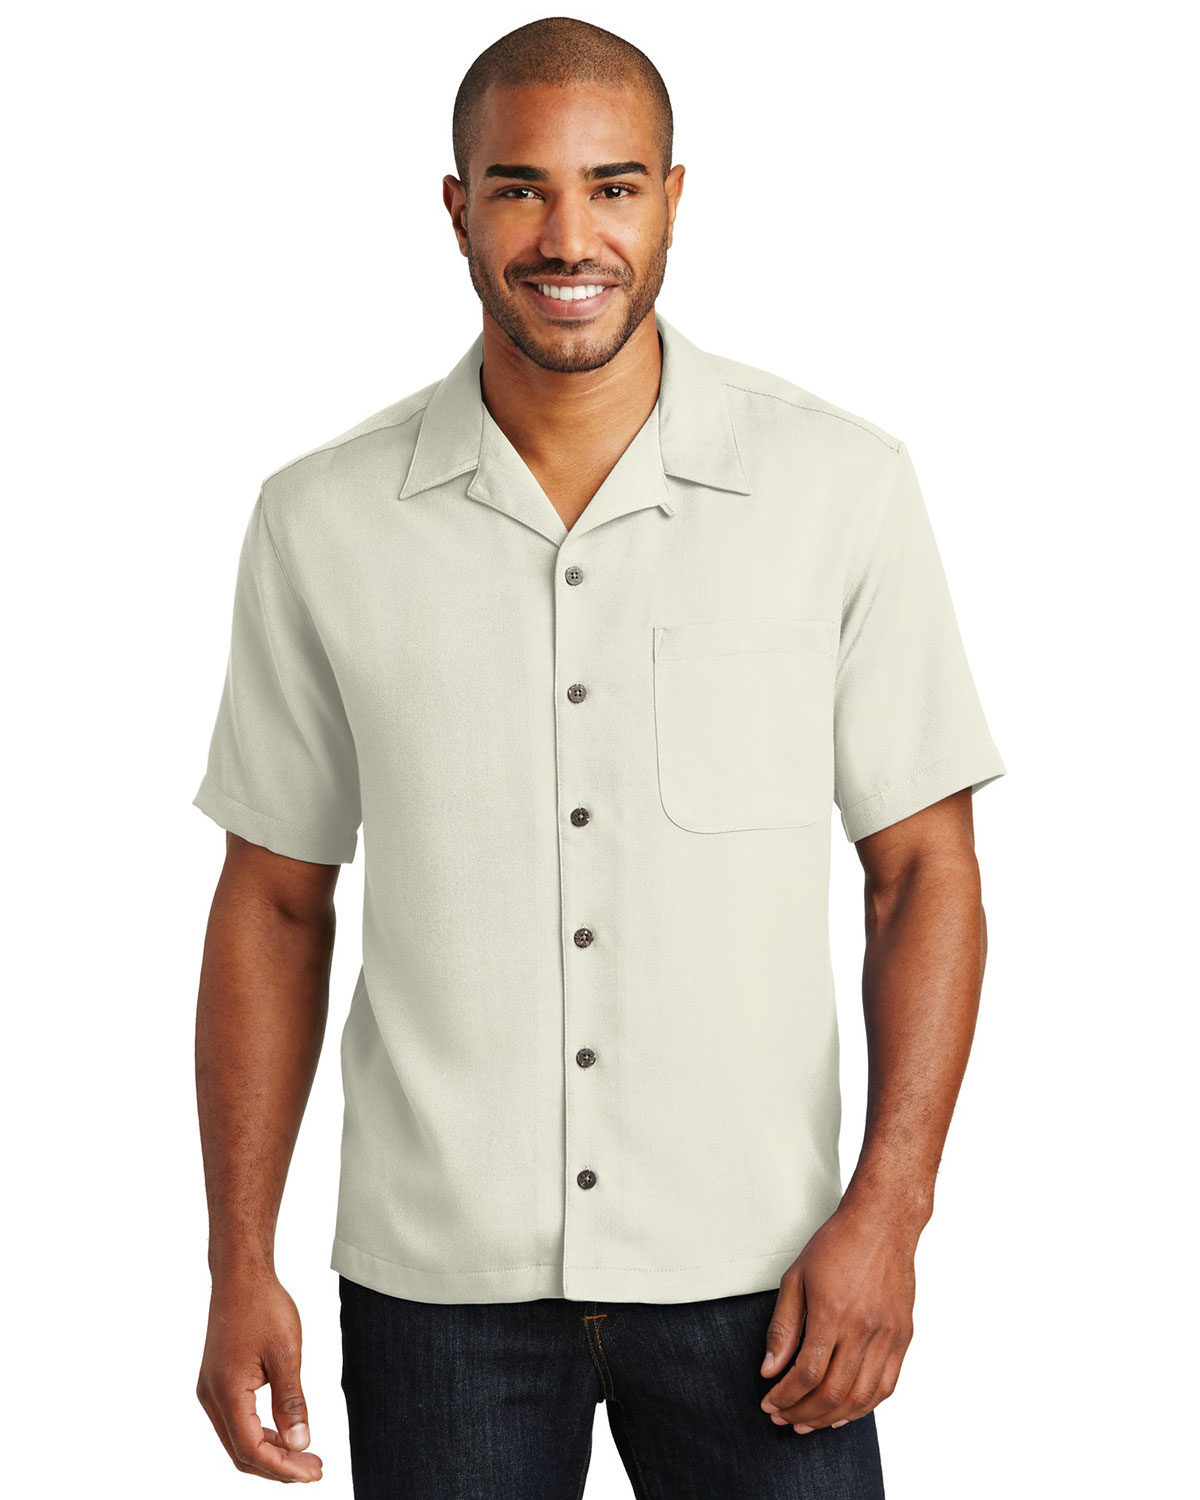 Port Authority S535 Men Easy Care Camp Shirt at Apparelstation